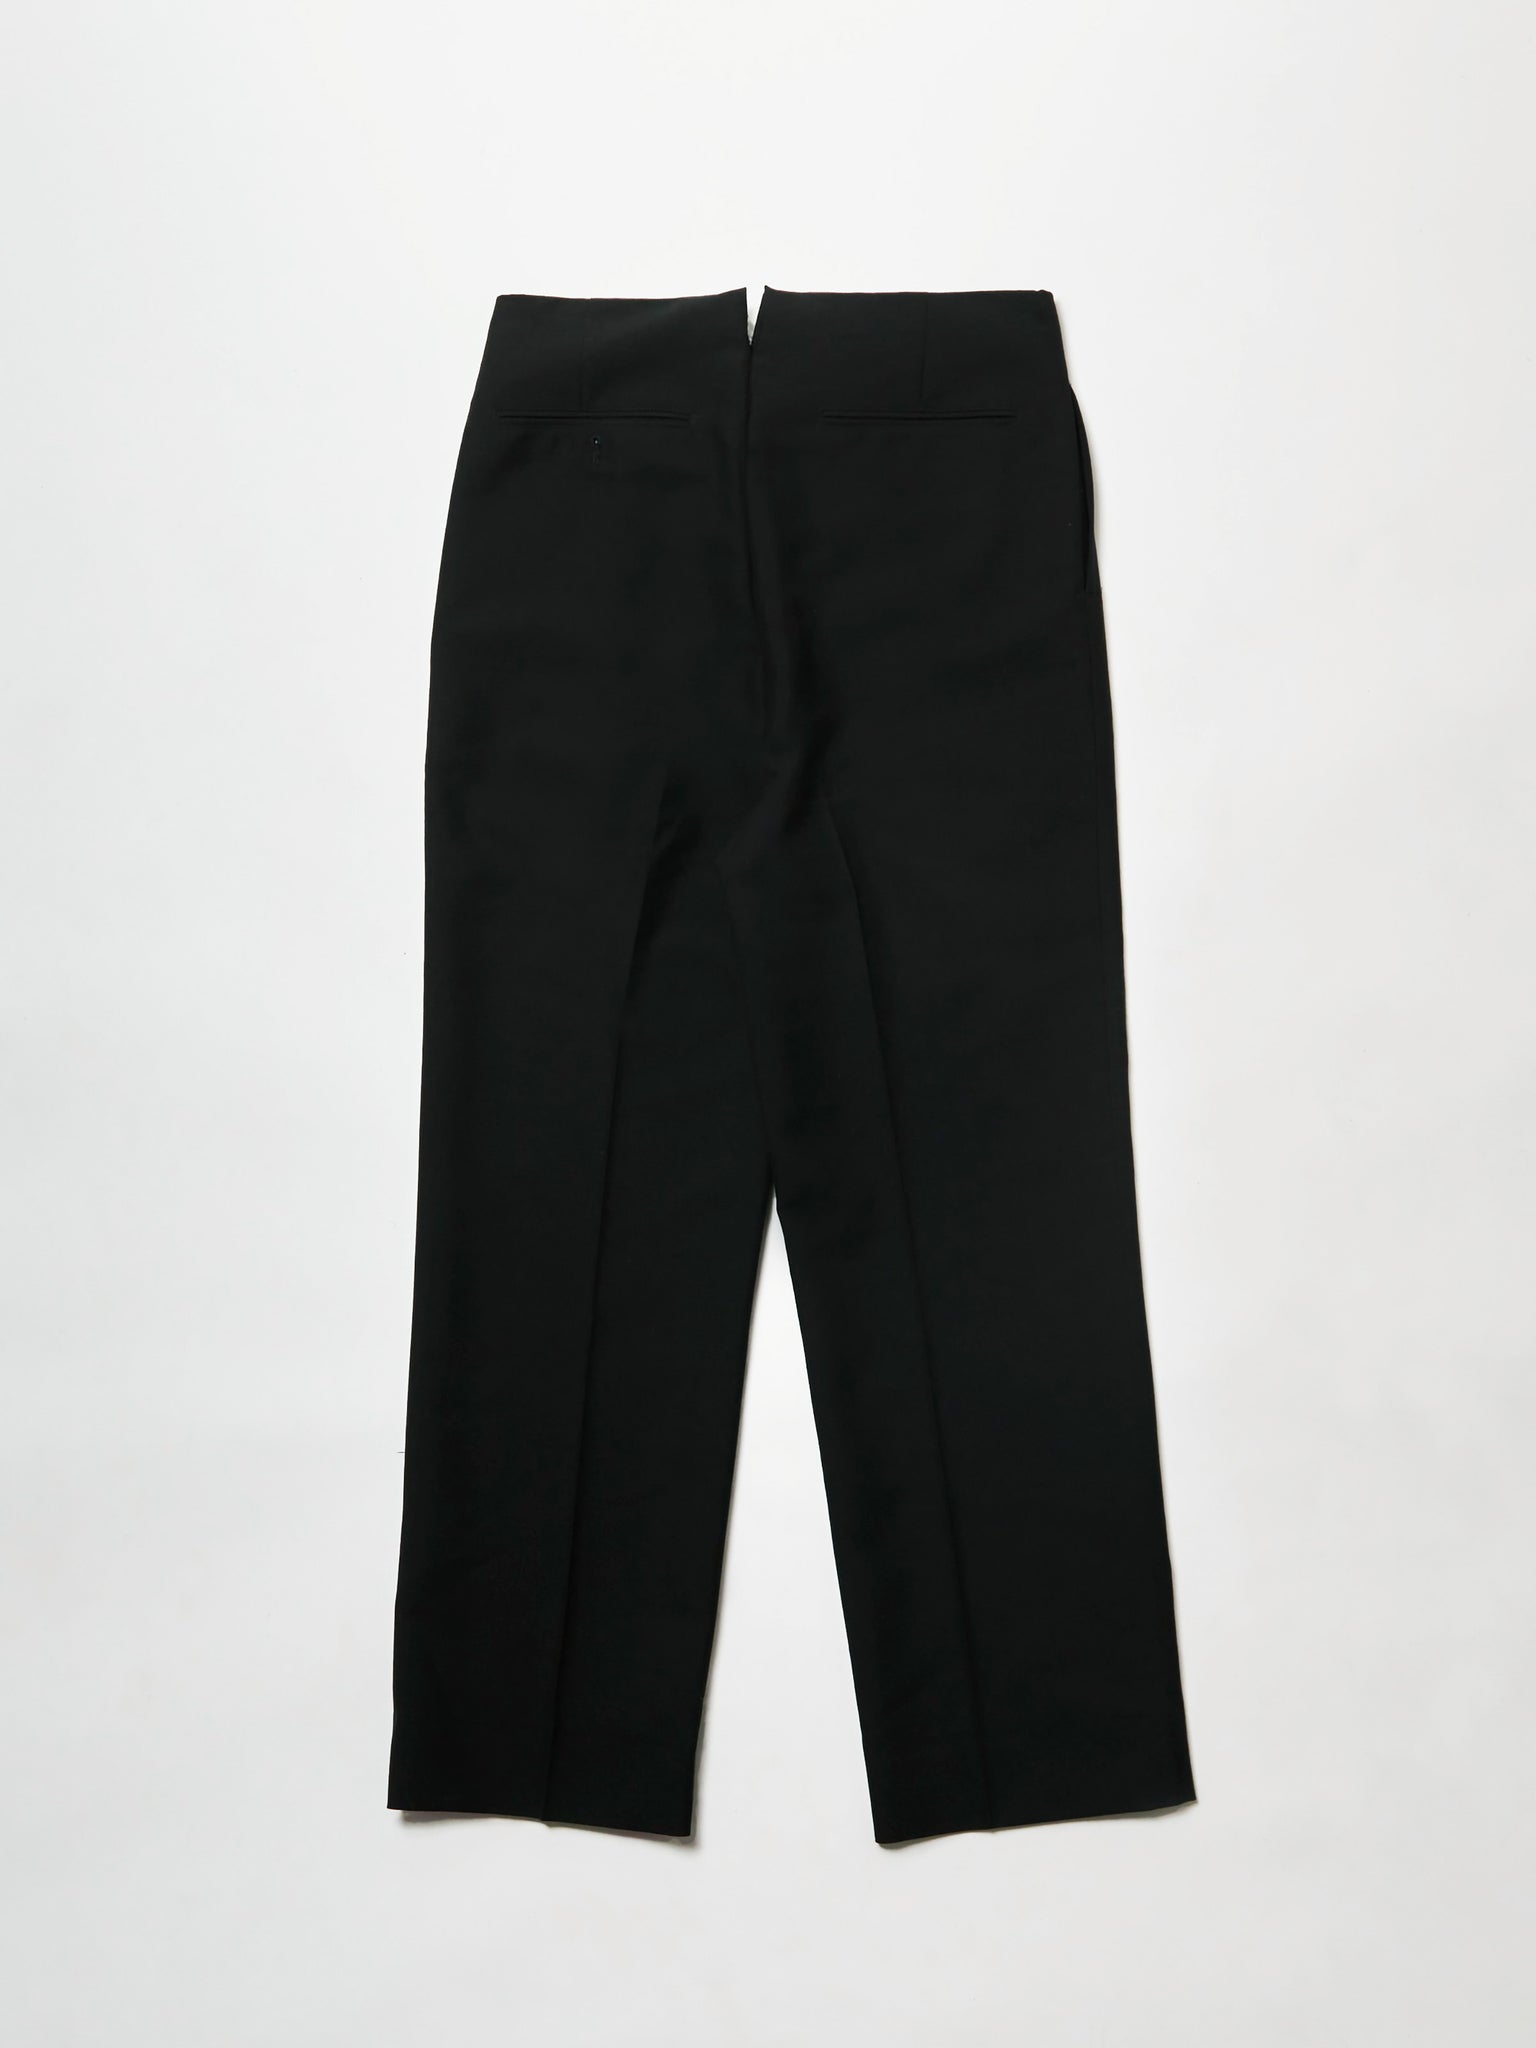 black flat front suiting trousers